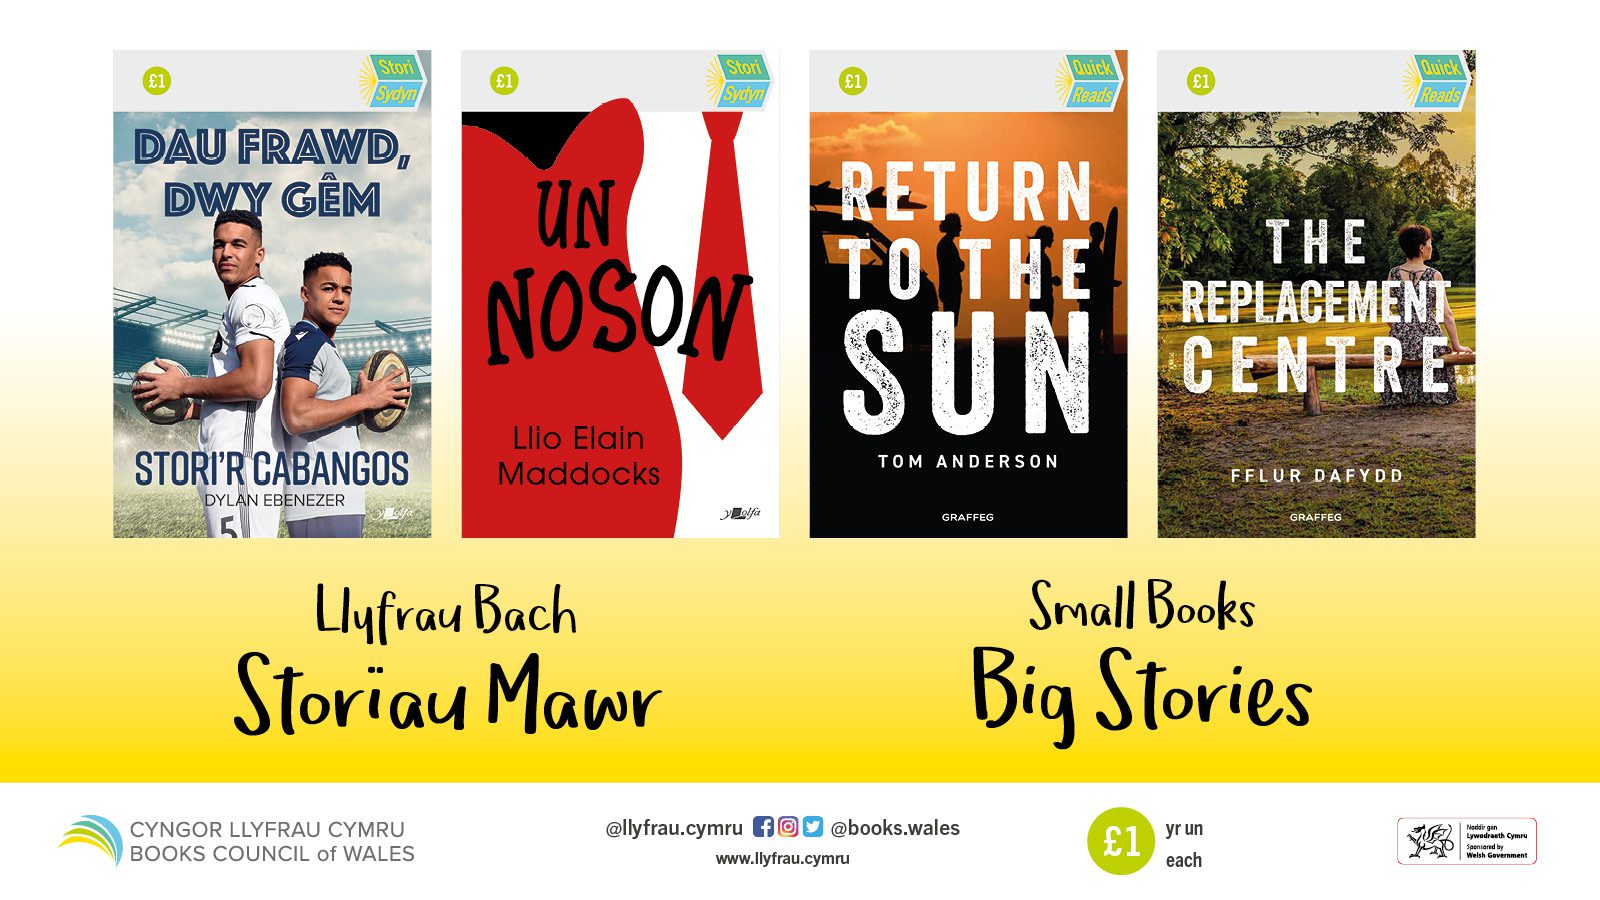 The covers of the four books published in our Quick Reads series in 2020